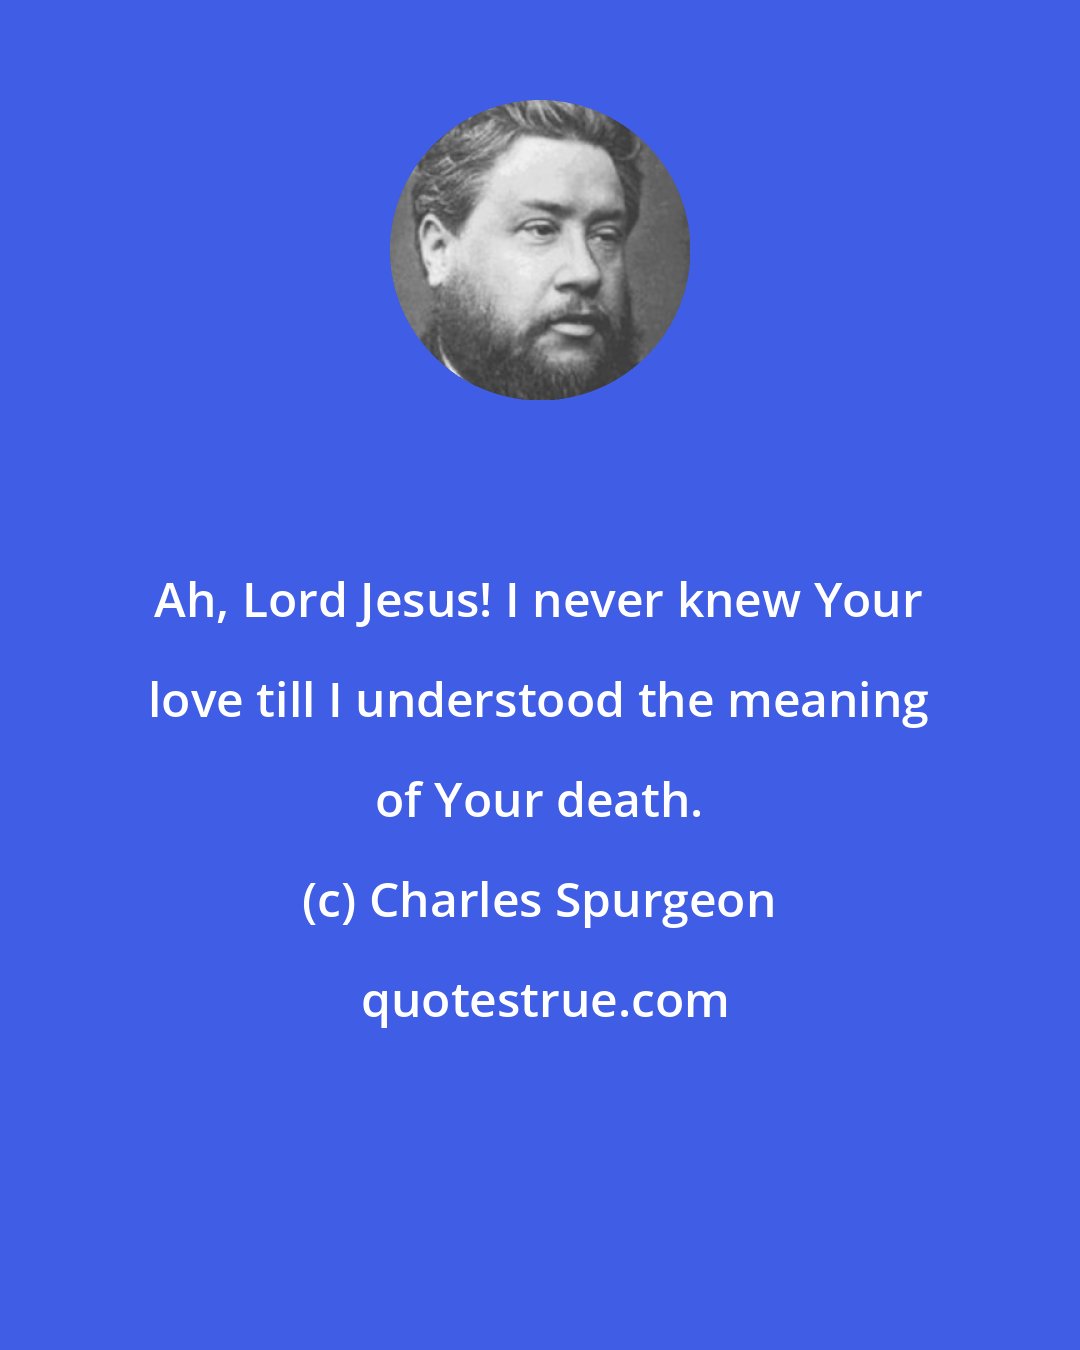 Charles Spurgeon: Ah, Lord Jesus! I never knew Your love till I understood the meaning of Your death.